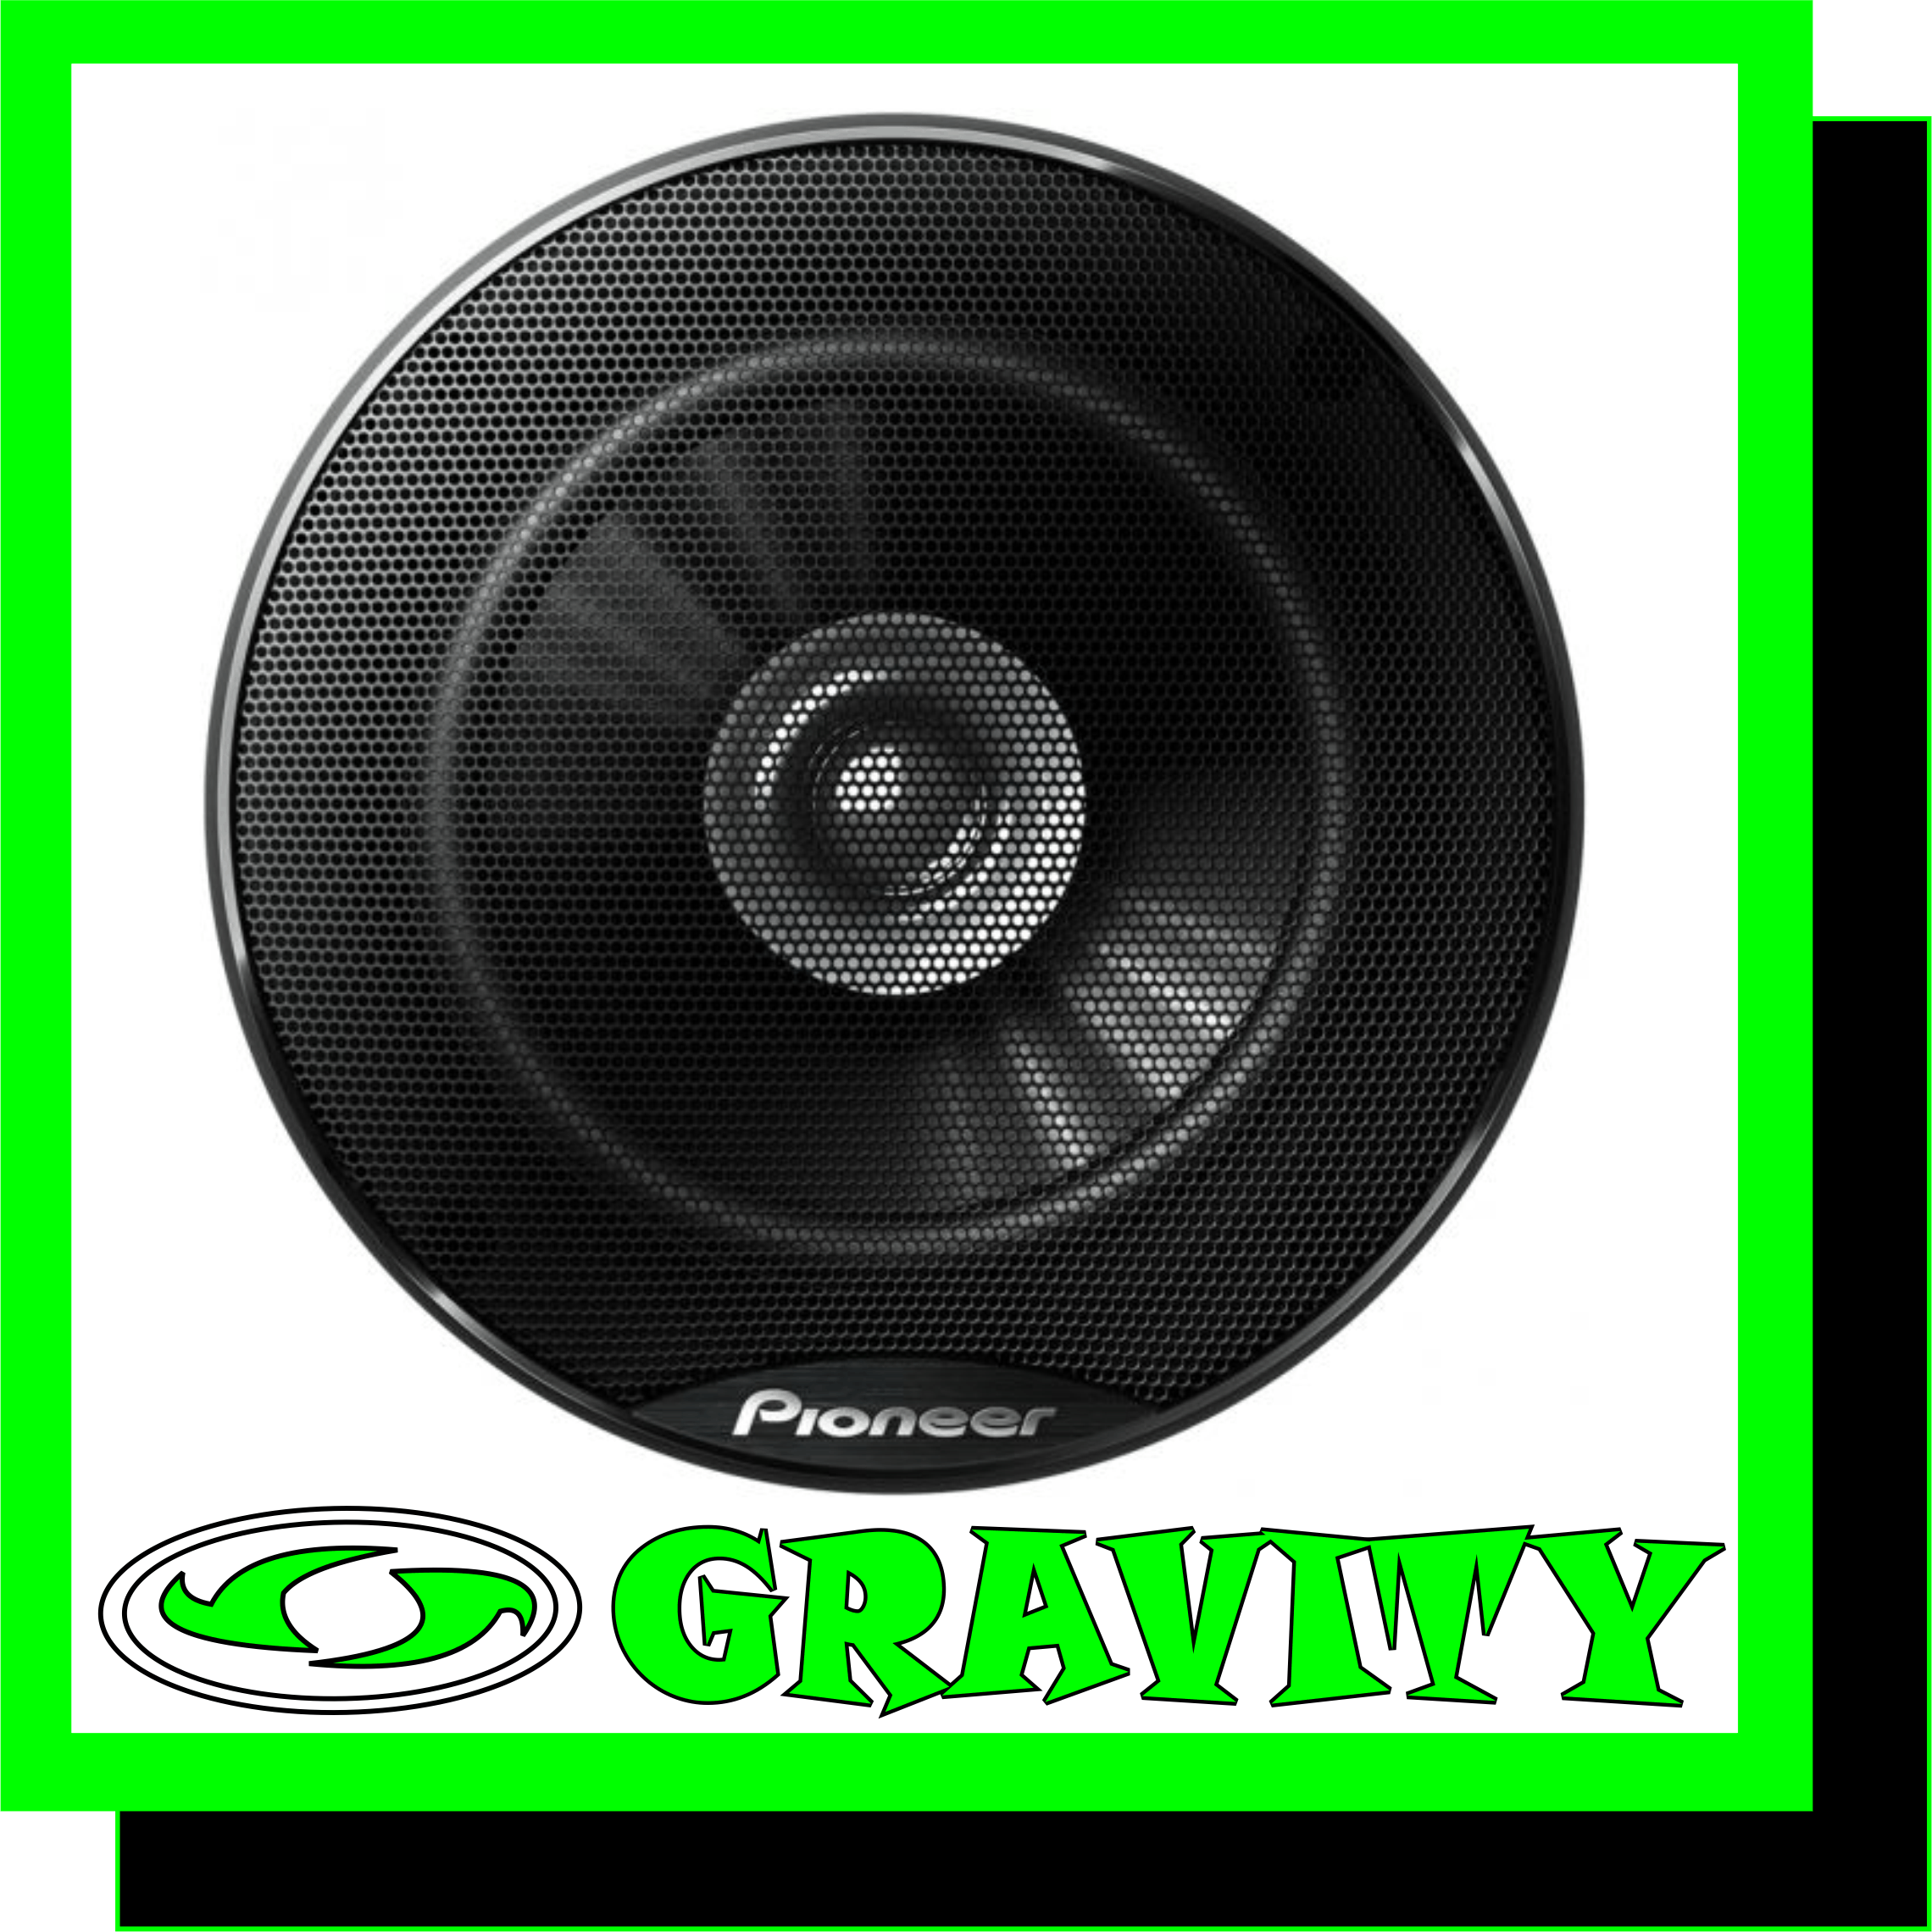 Pioneer 5'' Dual Cone Speakers  Size - 13 cm Frequency Response - 33Hz to 24 KHz Impedance - 4? Max output - 230 W Nominal output - 35 W Sensitivity - 88dB gravity audio